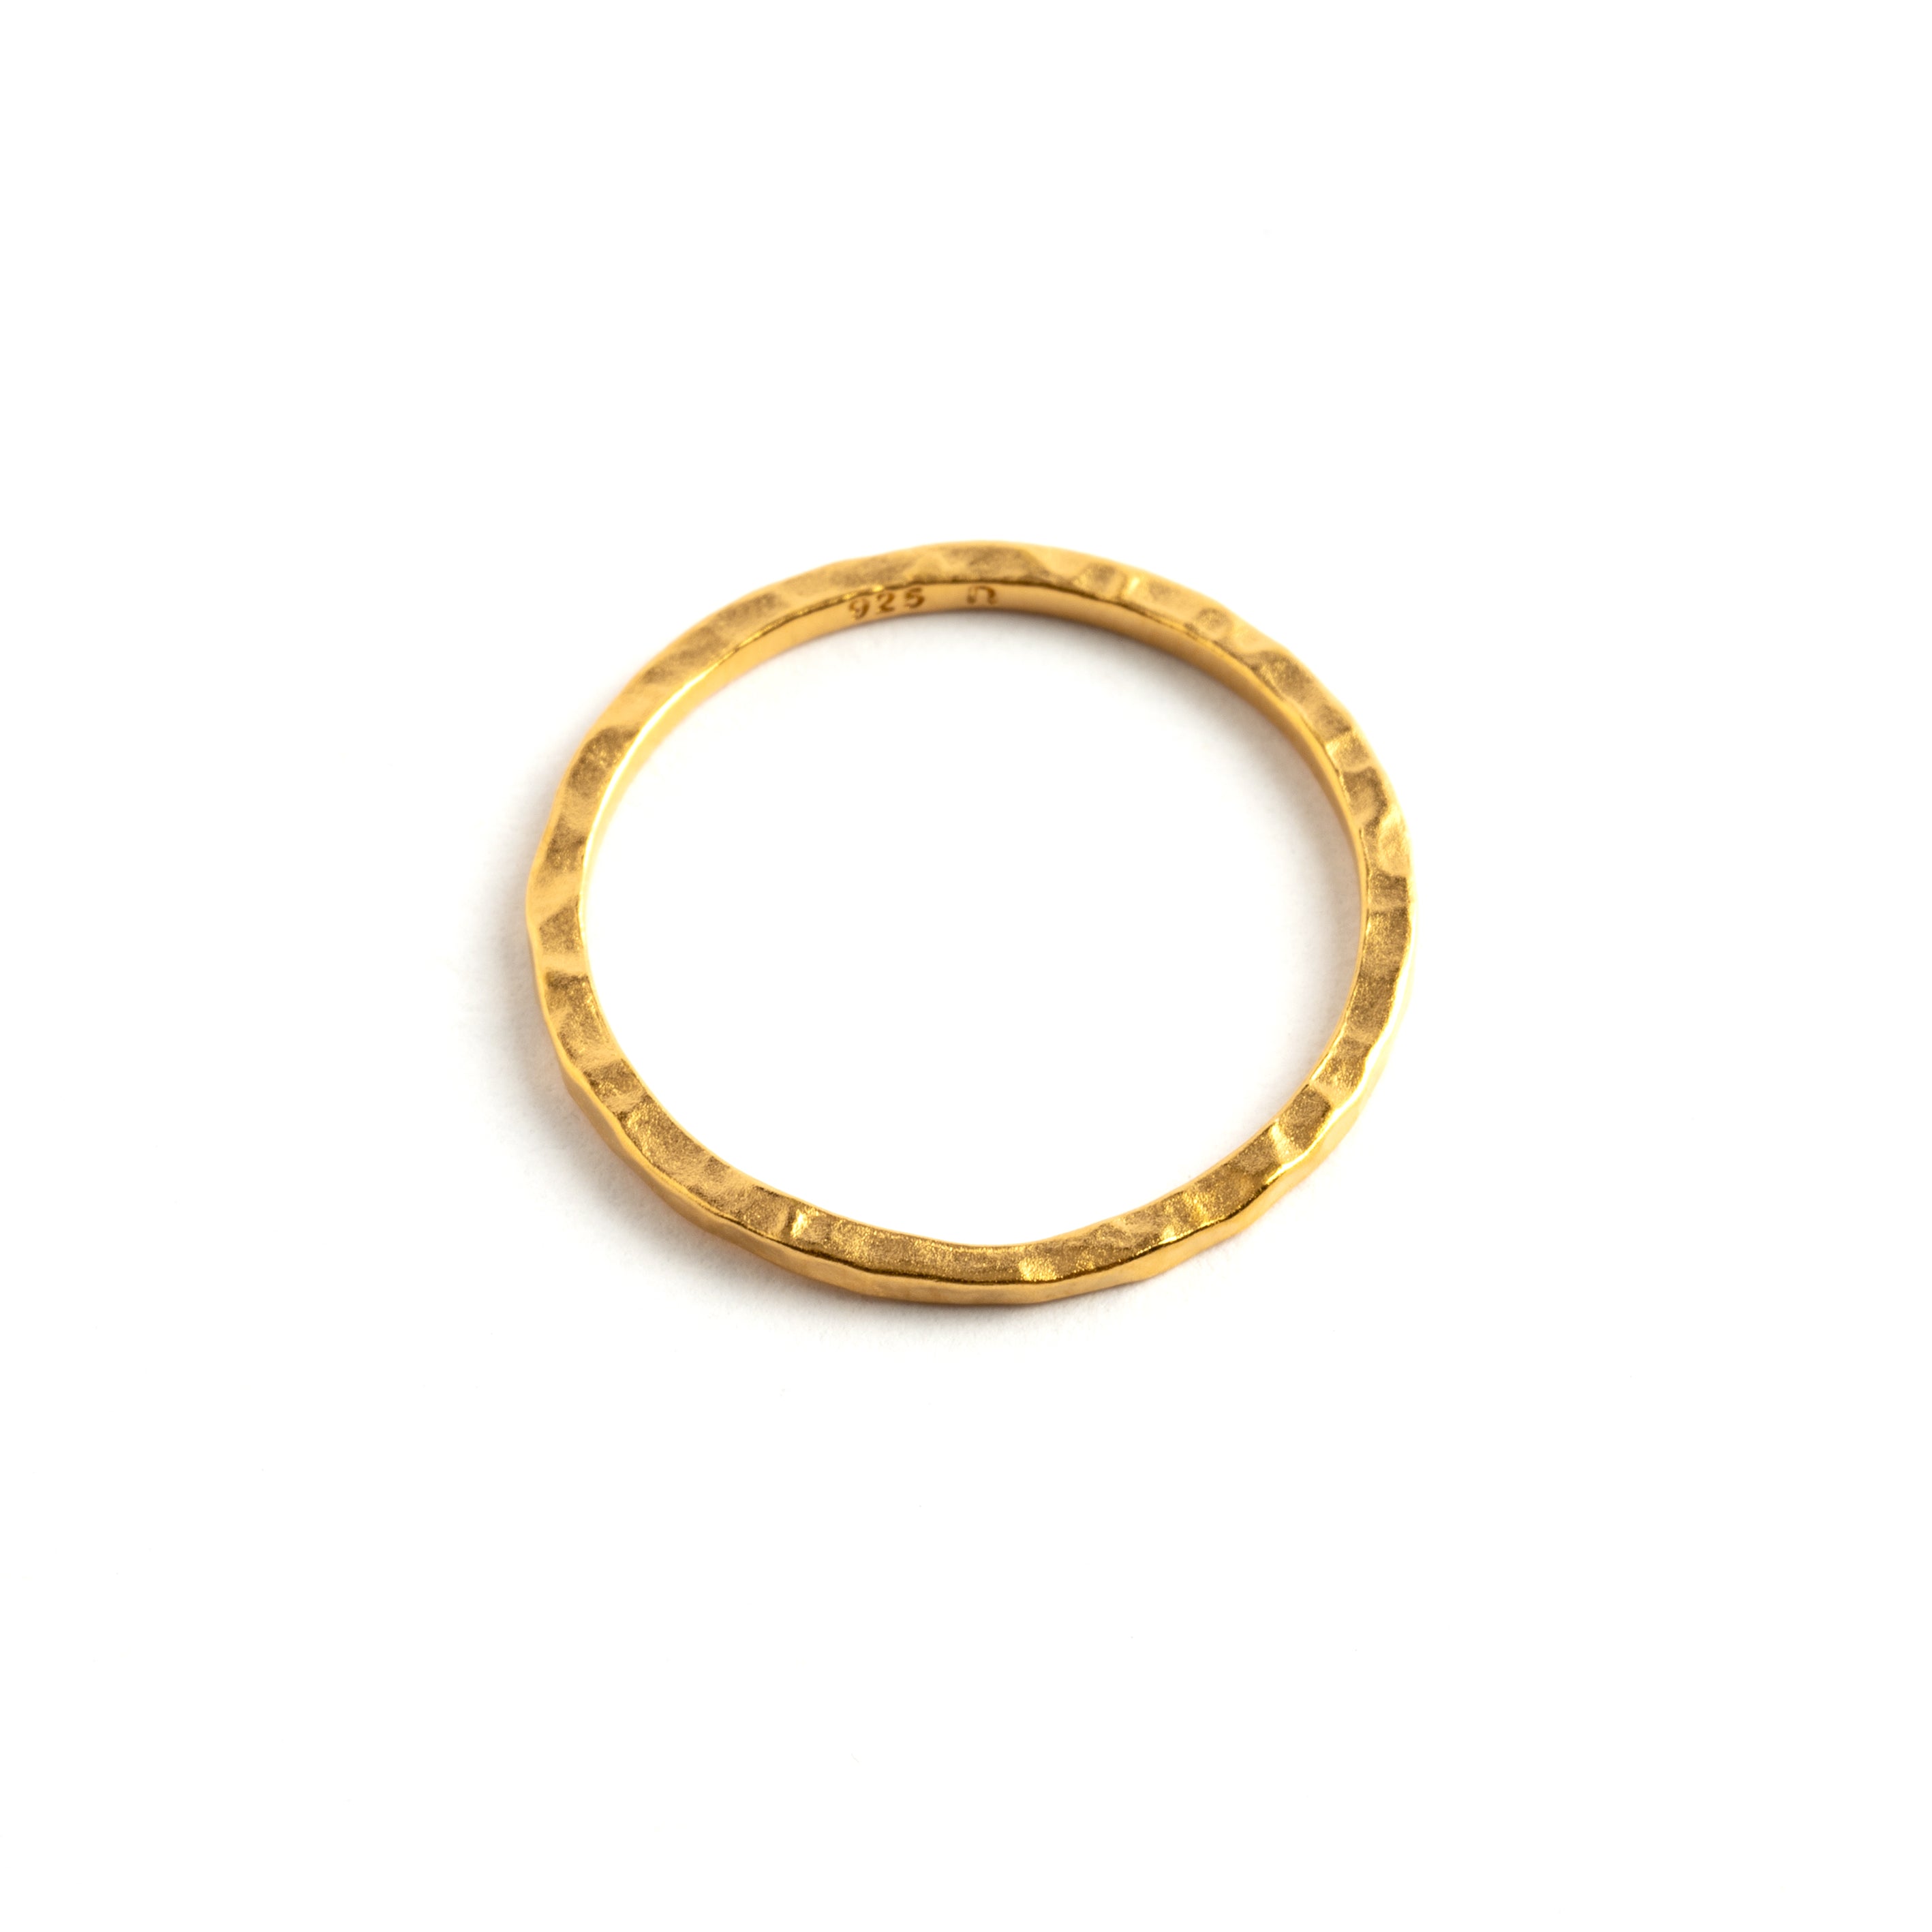 24k gold hammered stacking band ring right side view